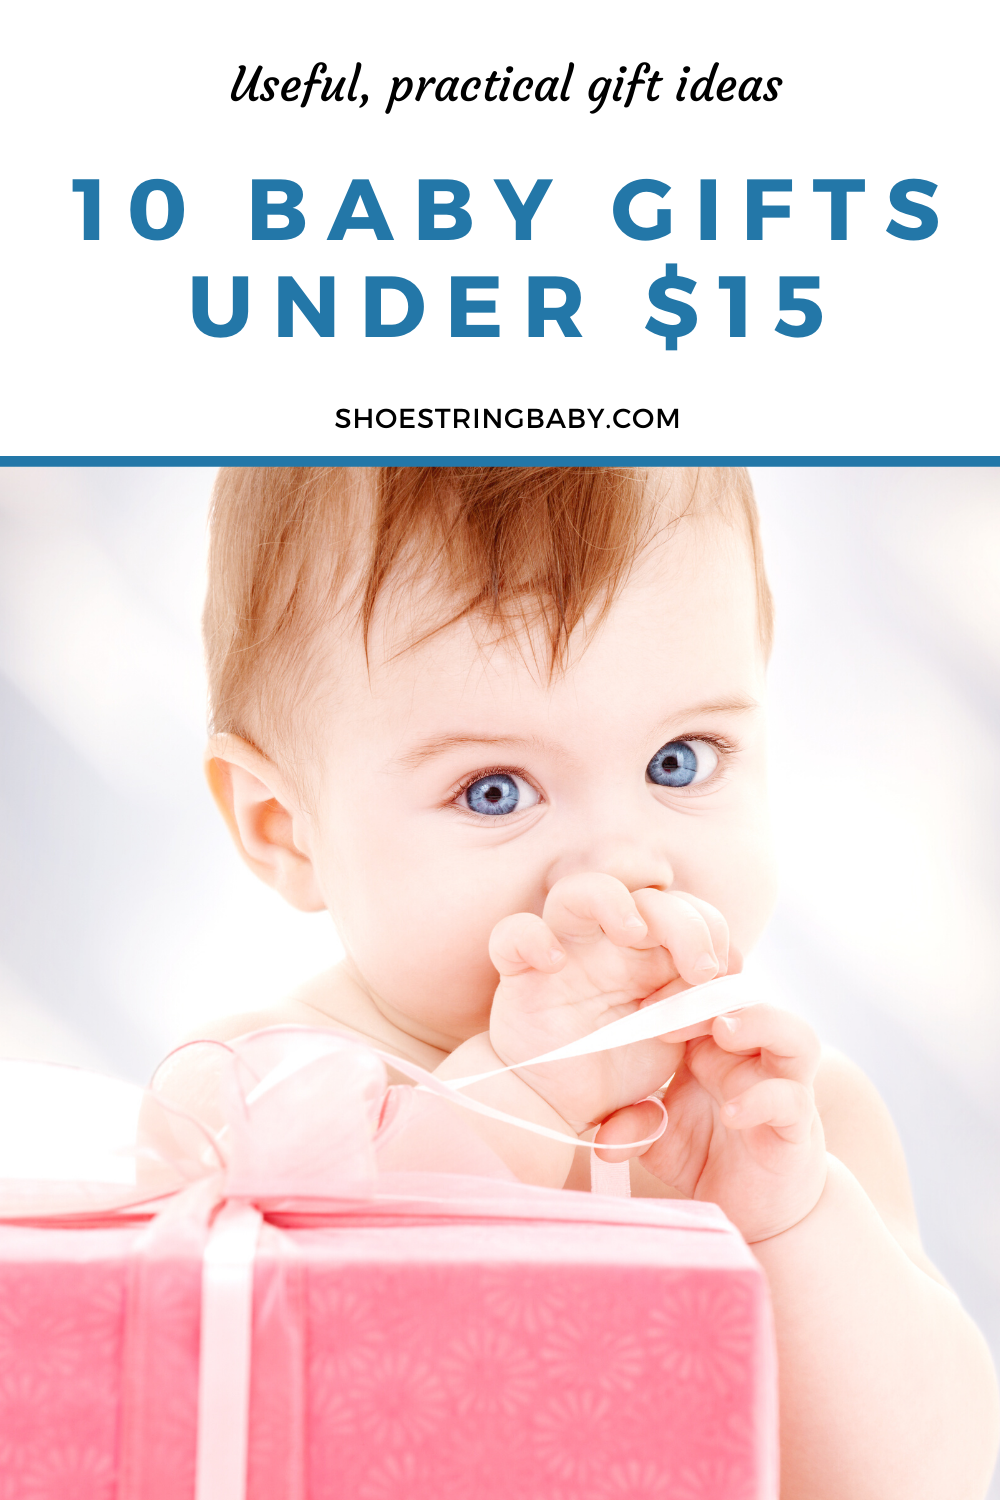 10 Useful Baby Gifts Under $15 | shoestring baby